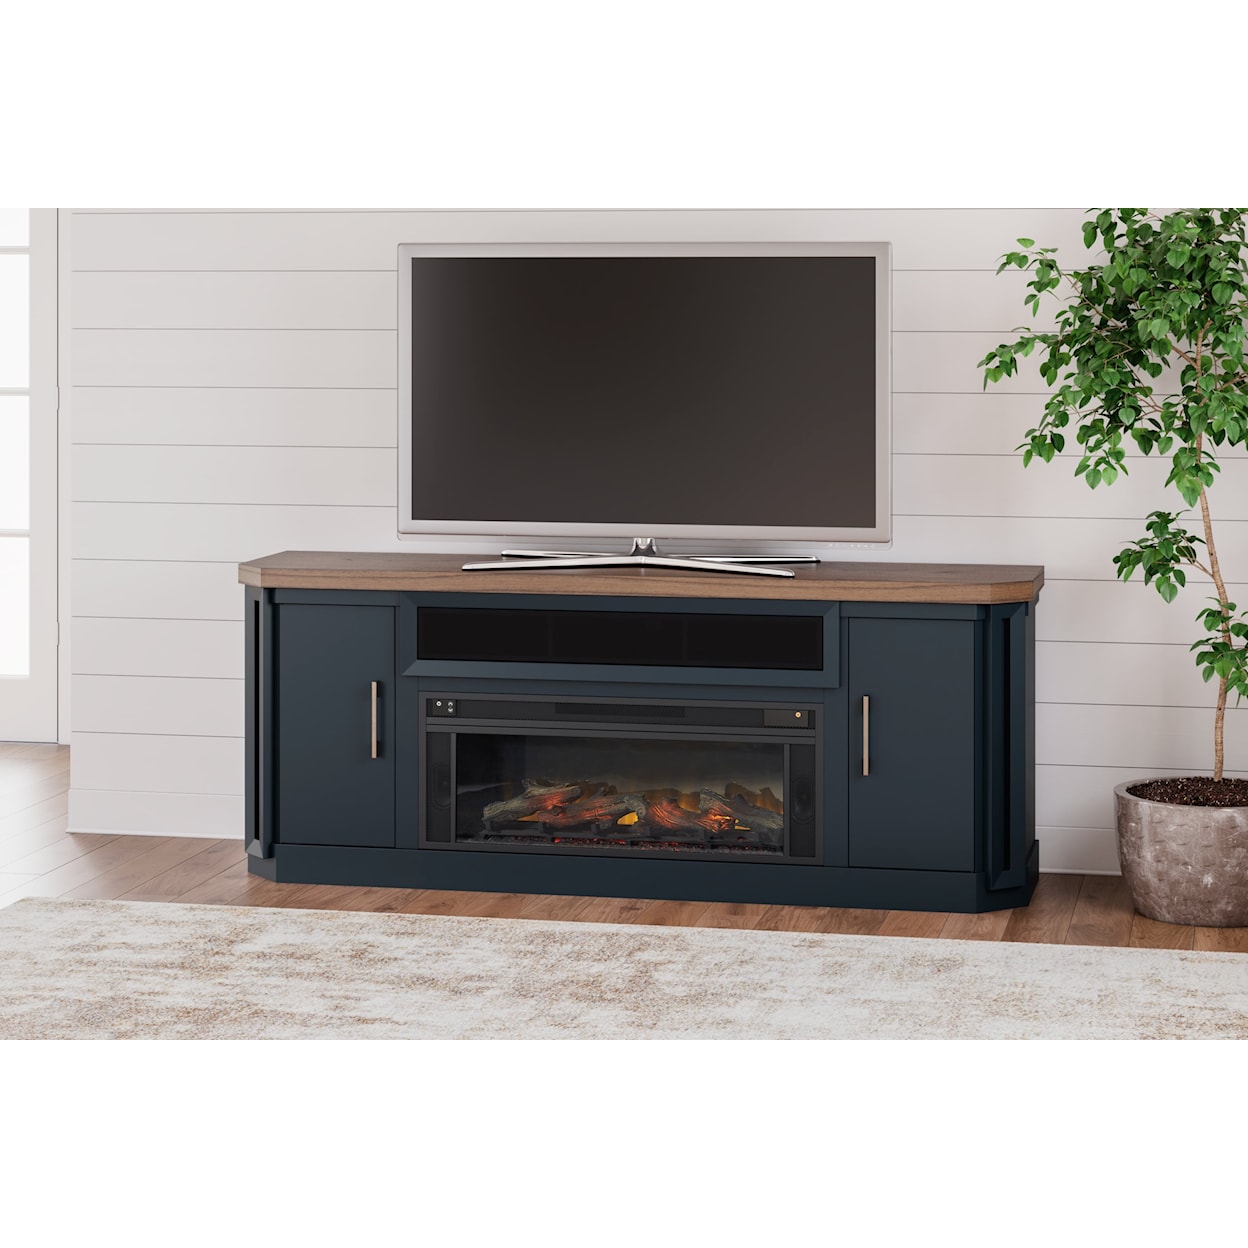 Benchcraft Landocken 83" TV Stand with Electric Fireplace